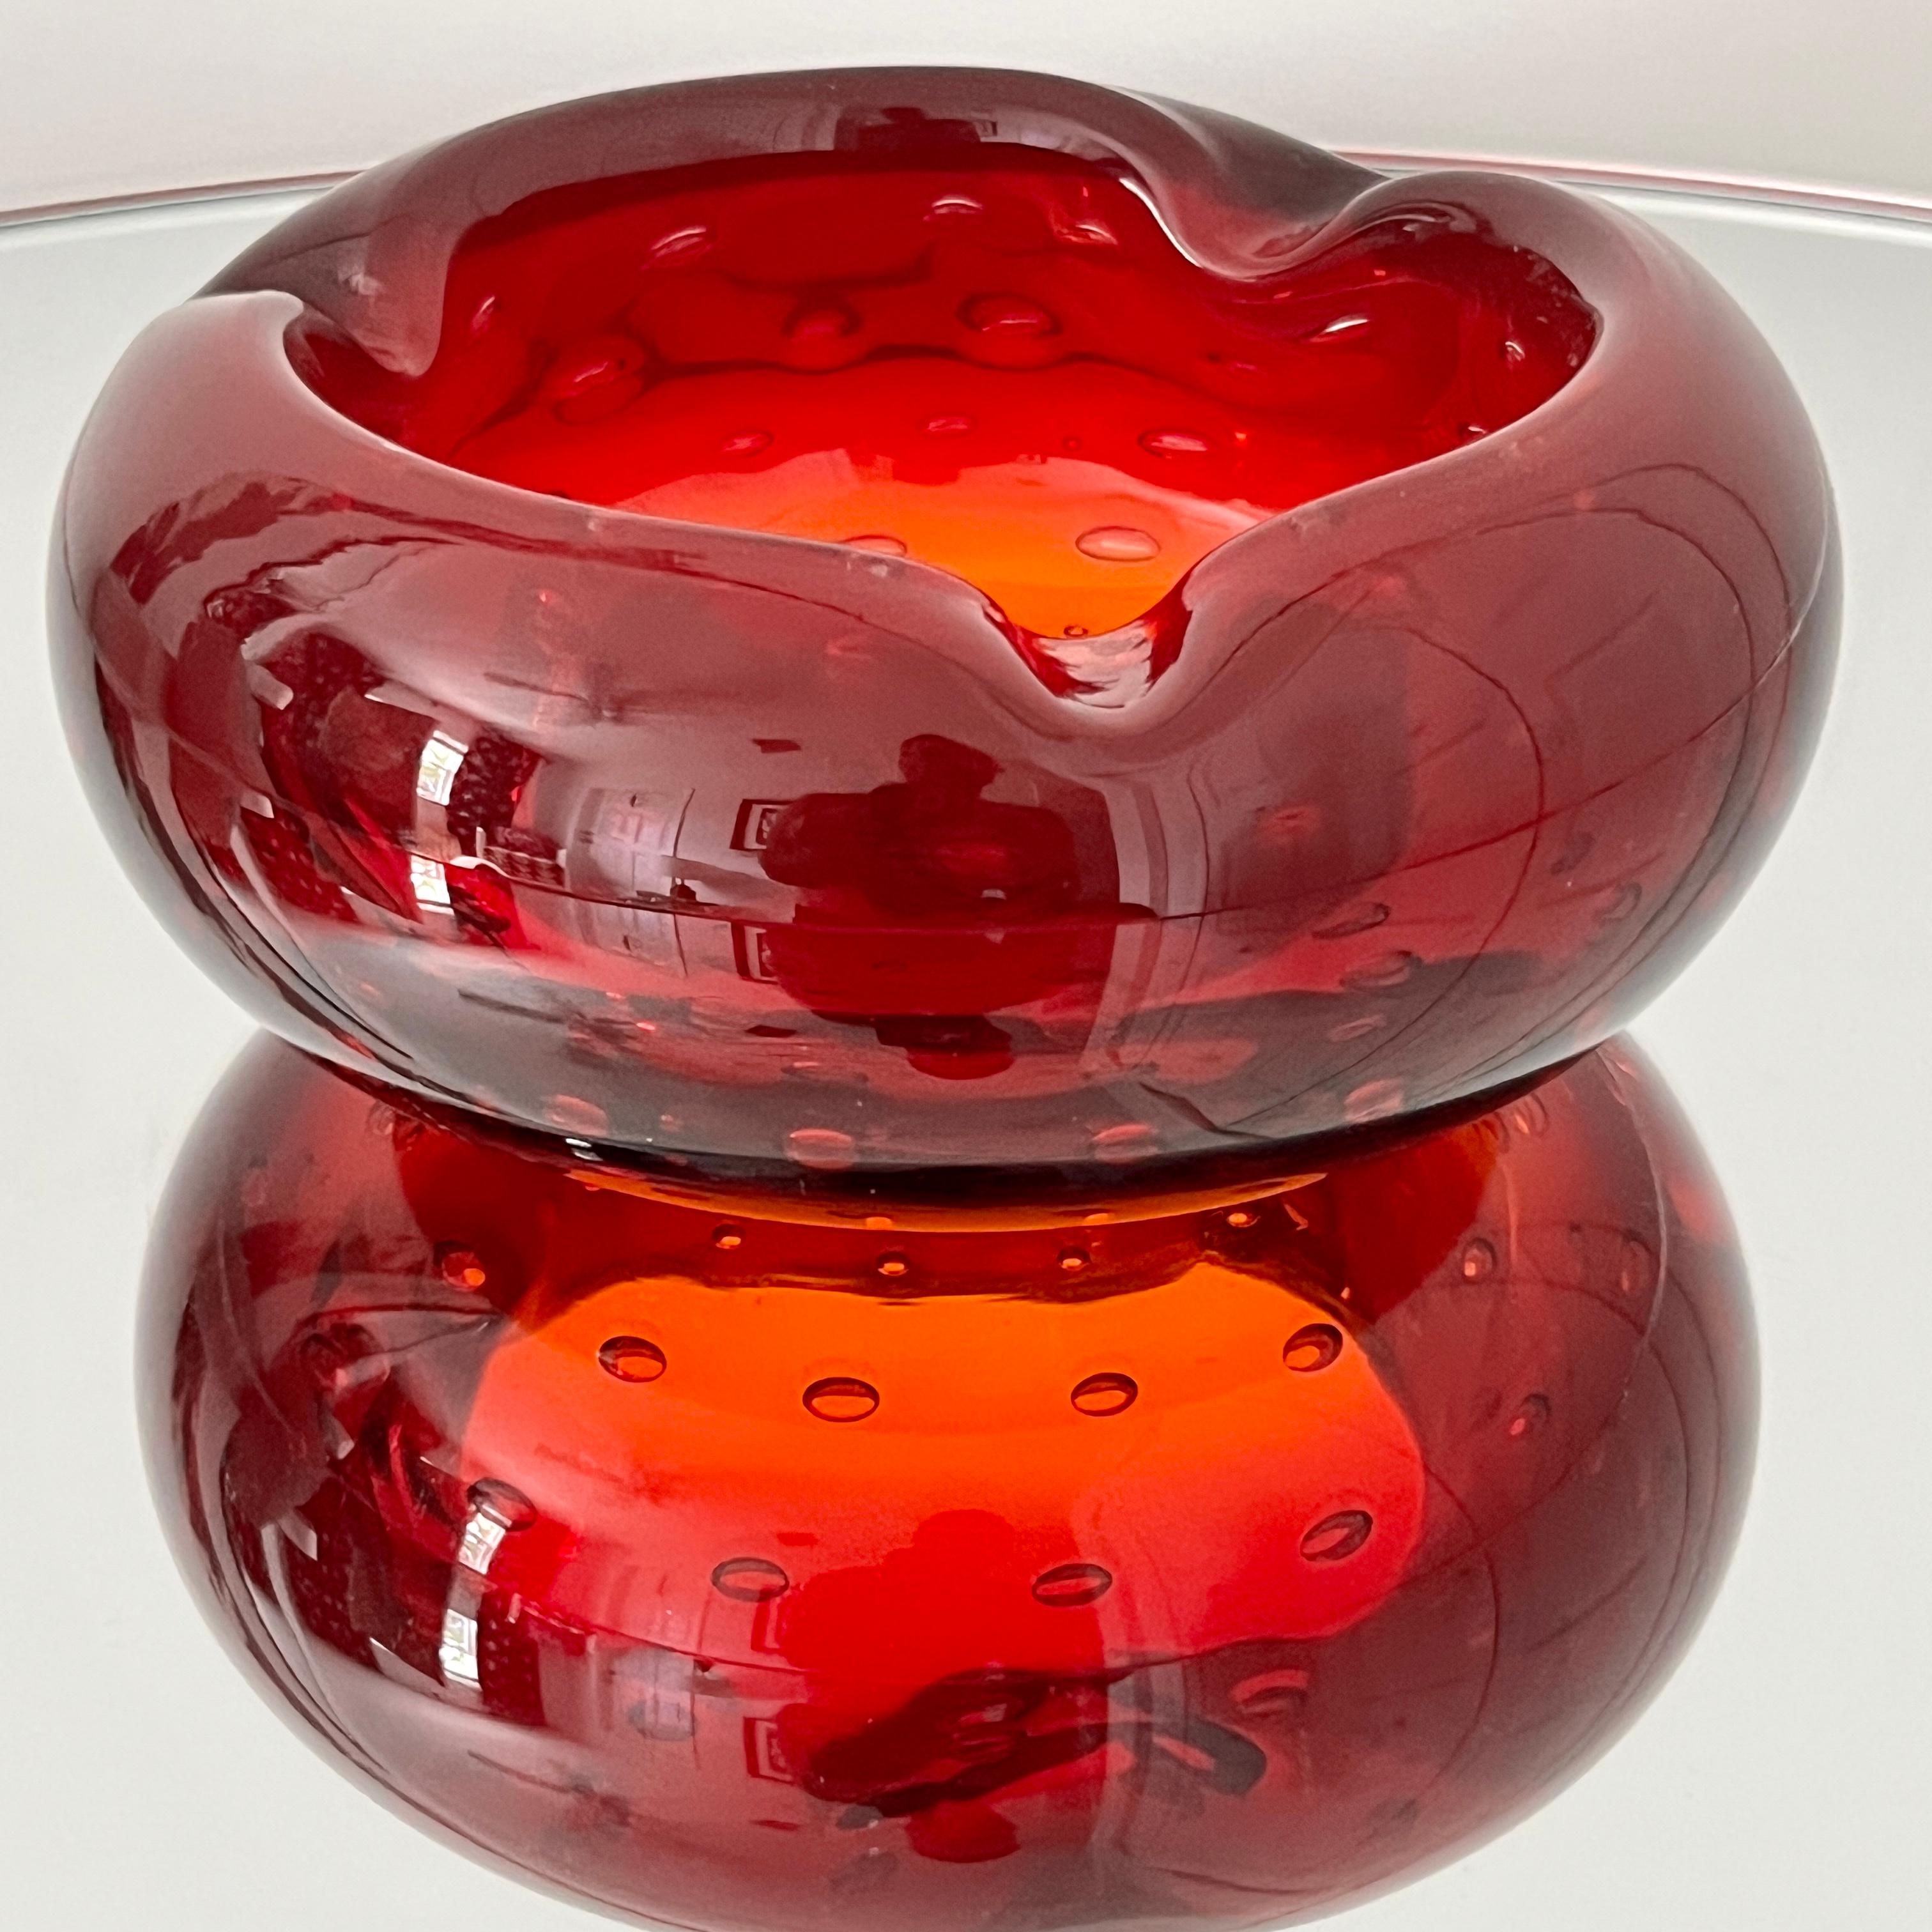 Mid-Century Modern Venetian glass ashtray in hues of deep red and orange. Handblown chunky glass with beautiful rounded form featuring controlled bubble accents and curved notches along the rim. Can be also be used as a decorative object, vide-poche